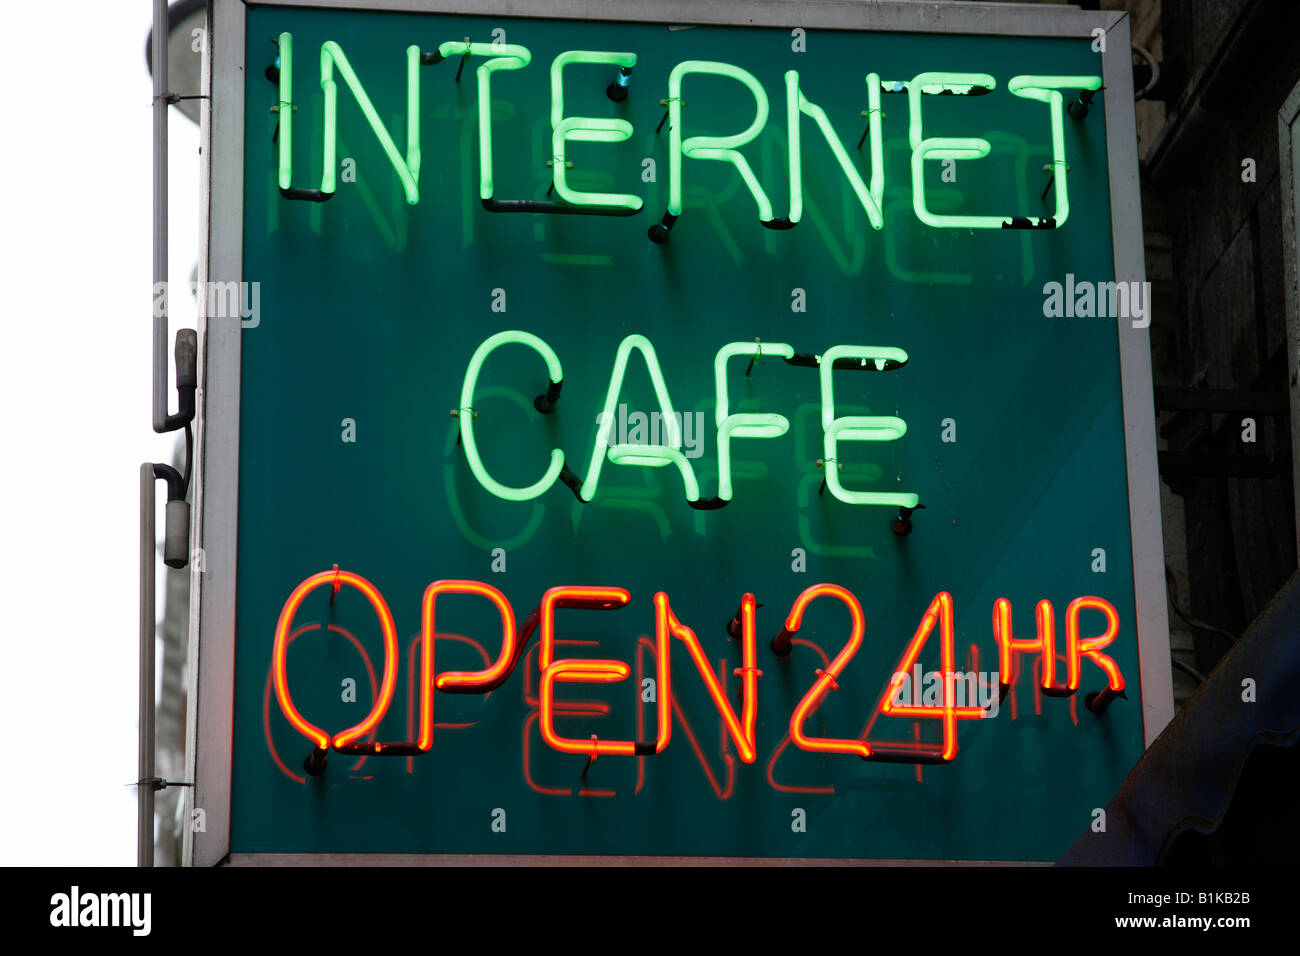 internet cafe neon sign in charing cross road london uk Stock Photo